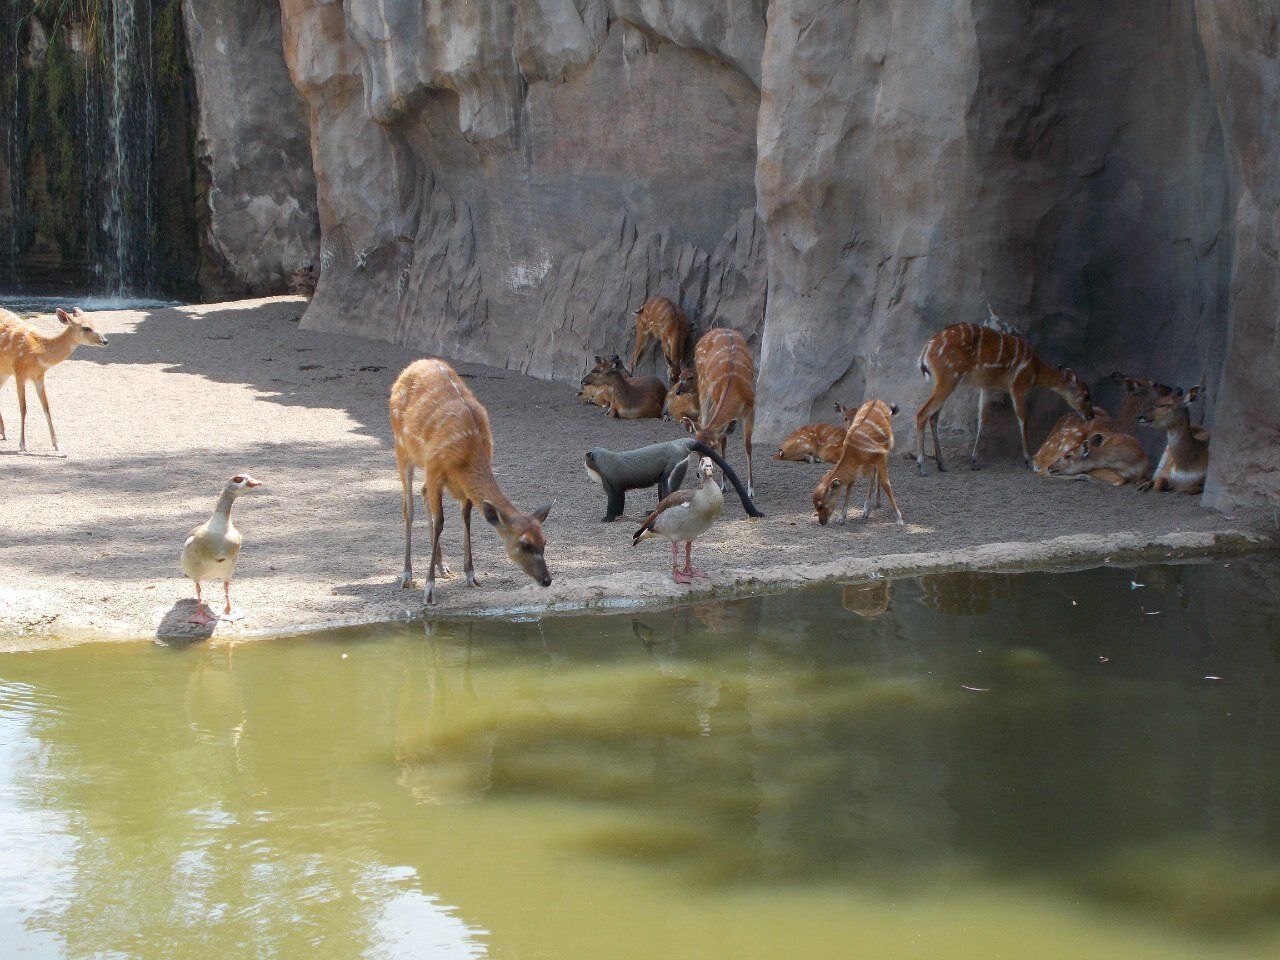 Roe deer, monkeys and birds live together in one area of the biopark